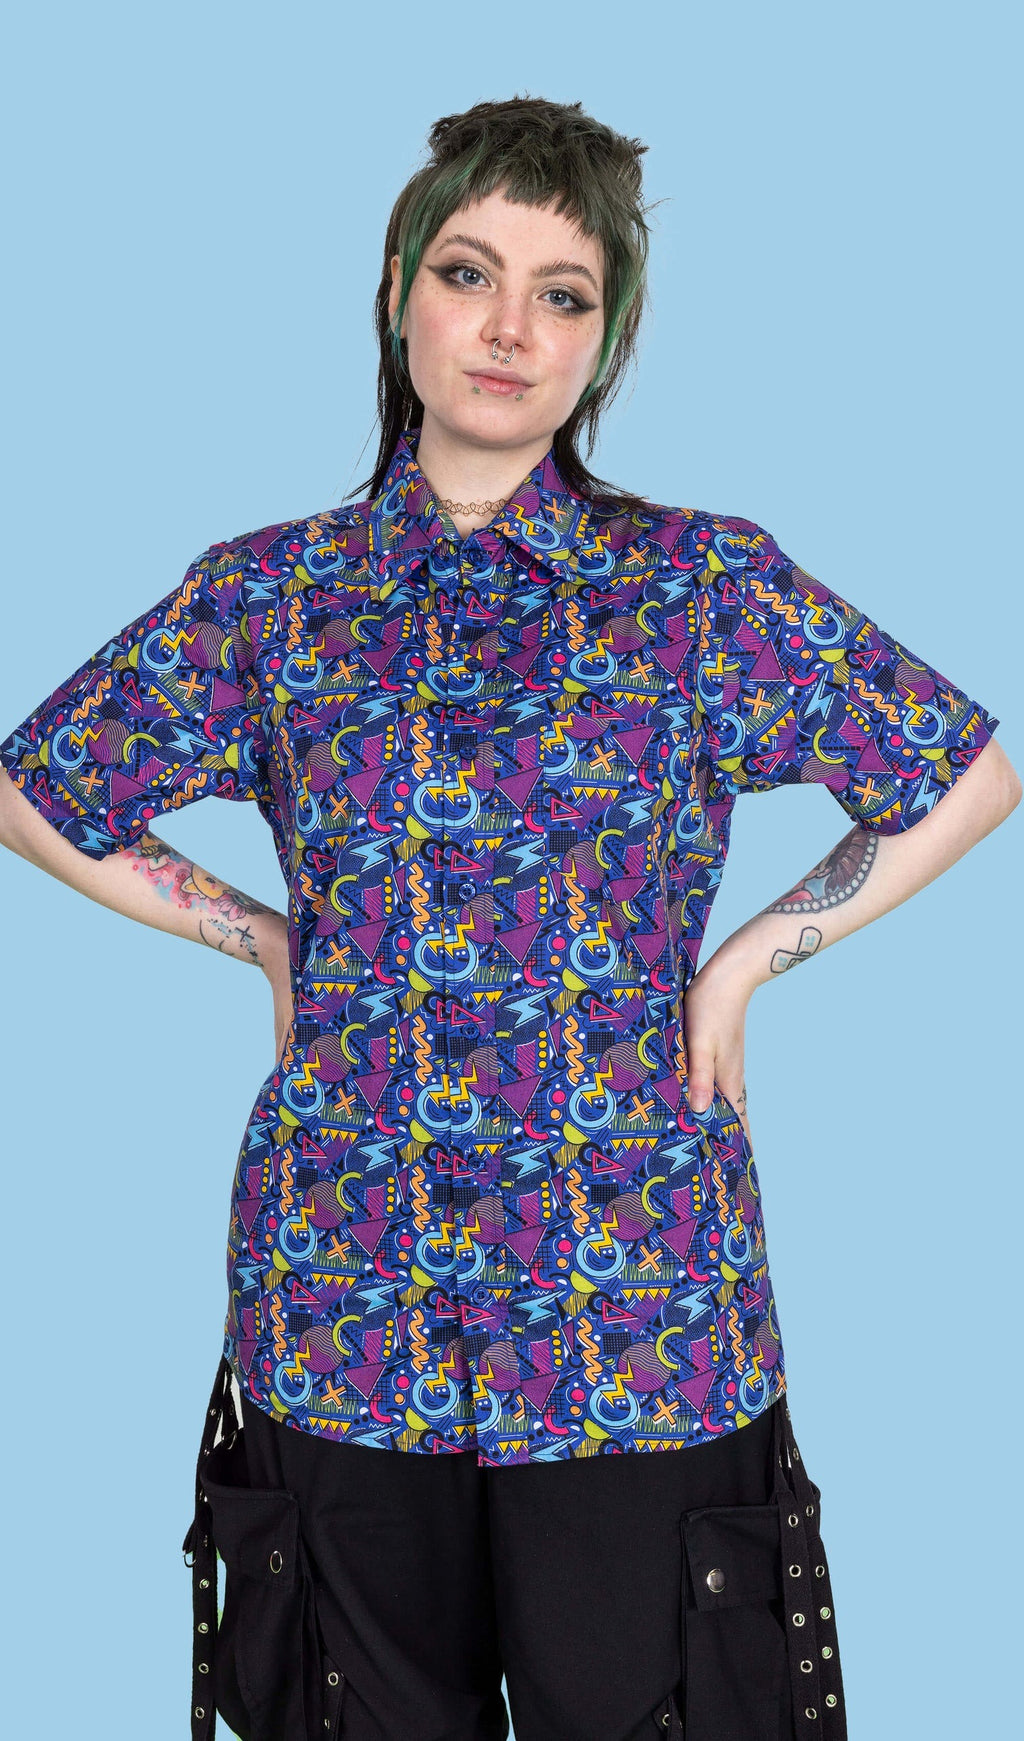 90's Retro Arcade Print Shirt by Run and Fly